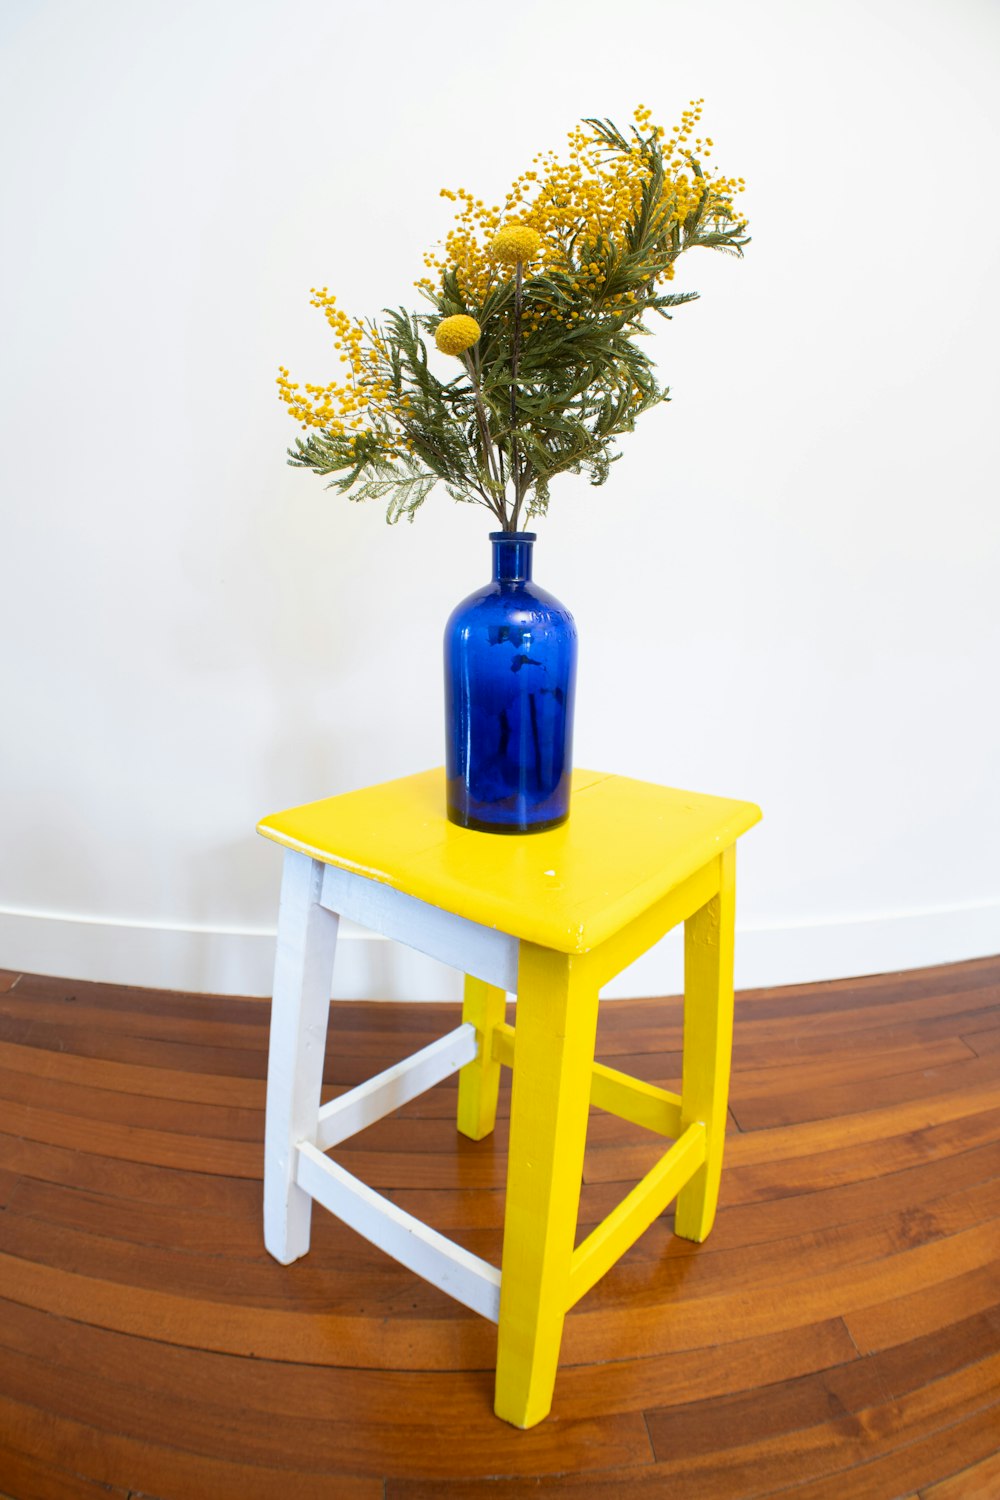 a vase with yellow flowers on a table